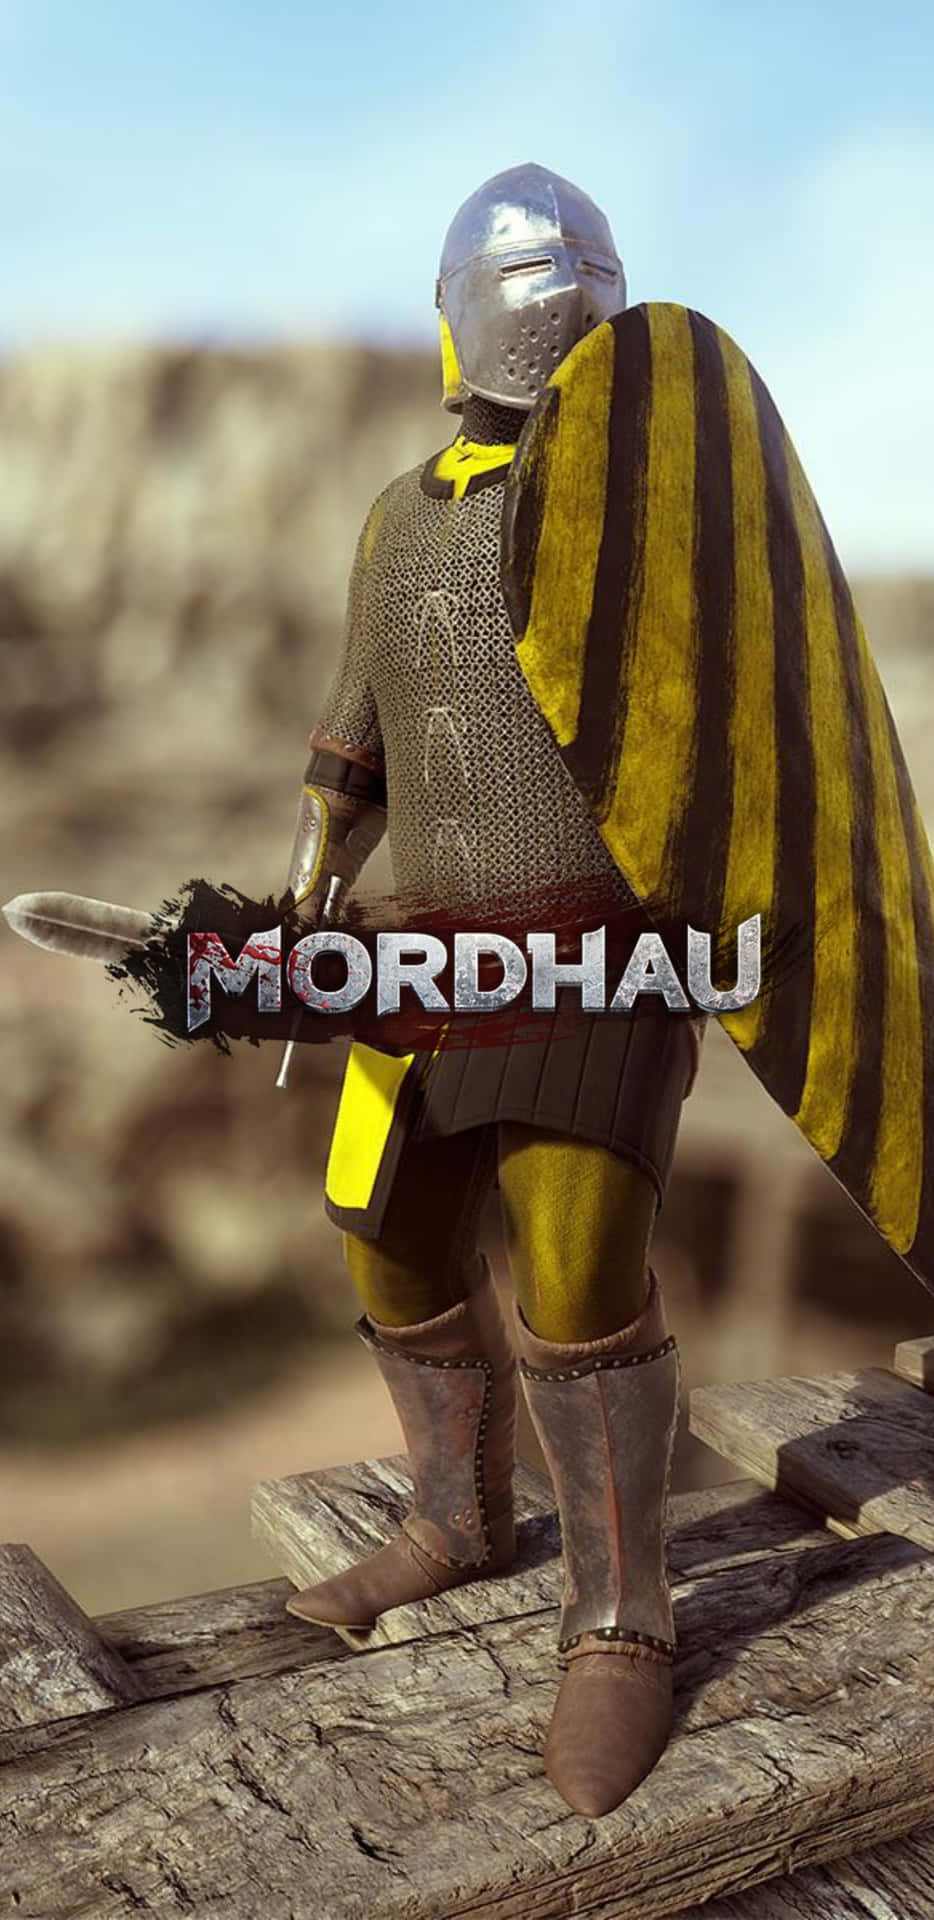 Mordhaul - A Knight In Armor Standing On A Wooden Platform